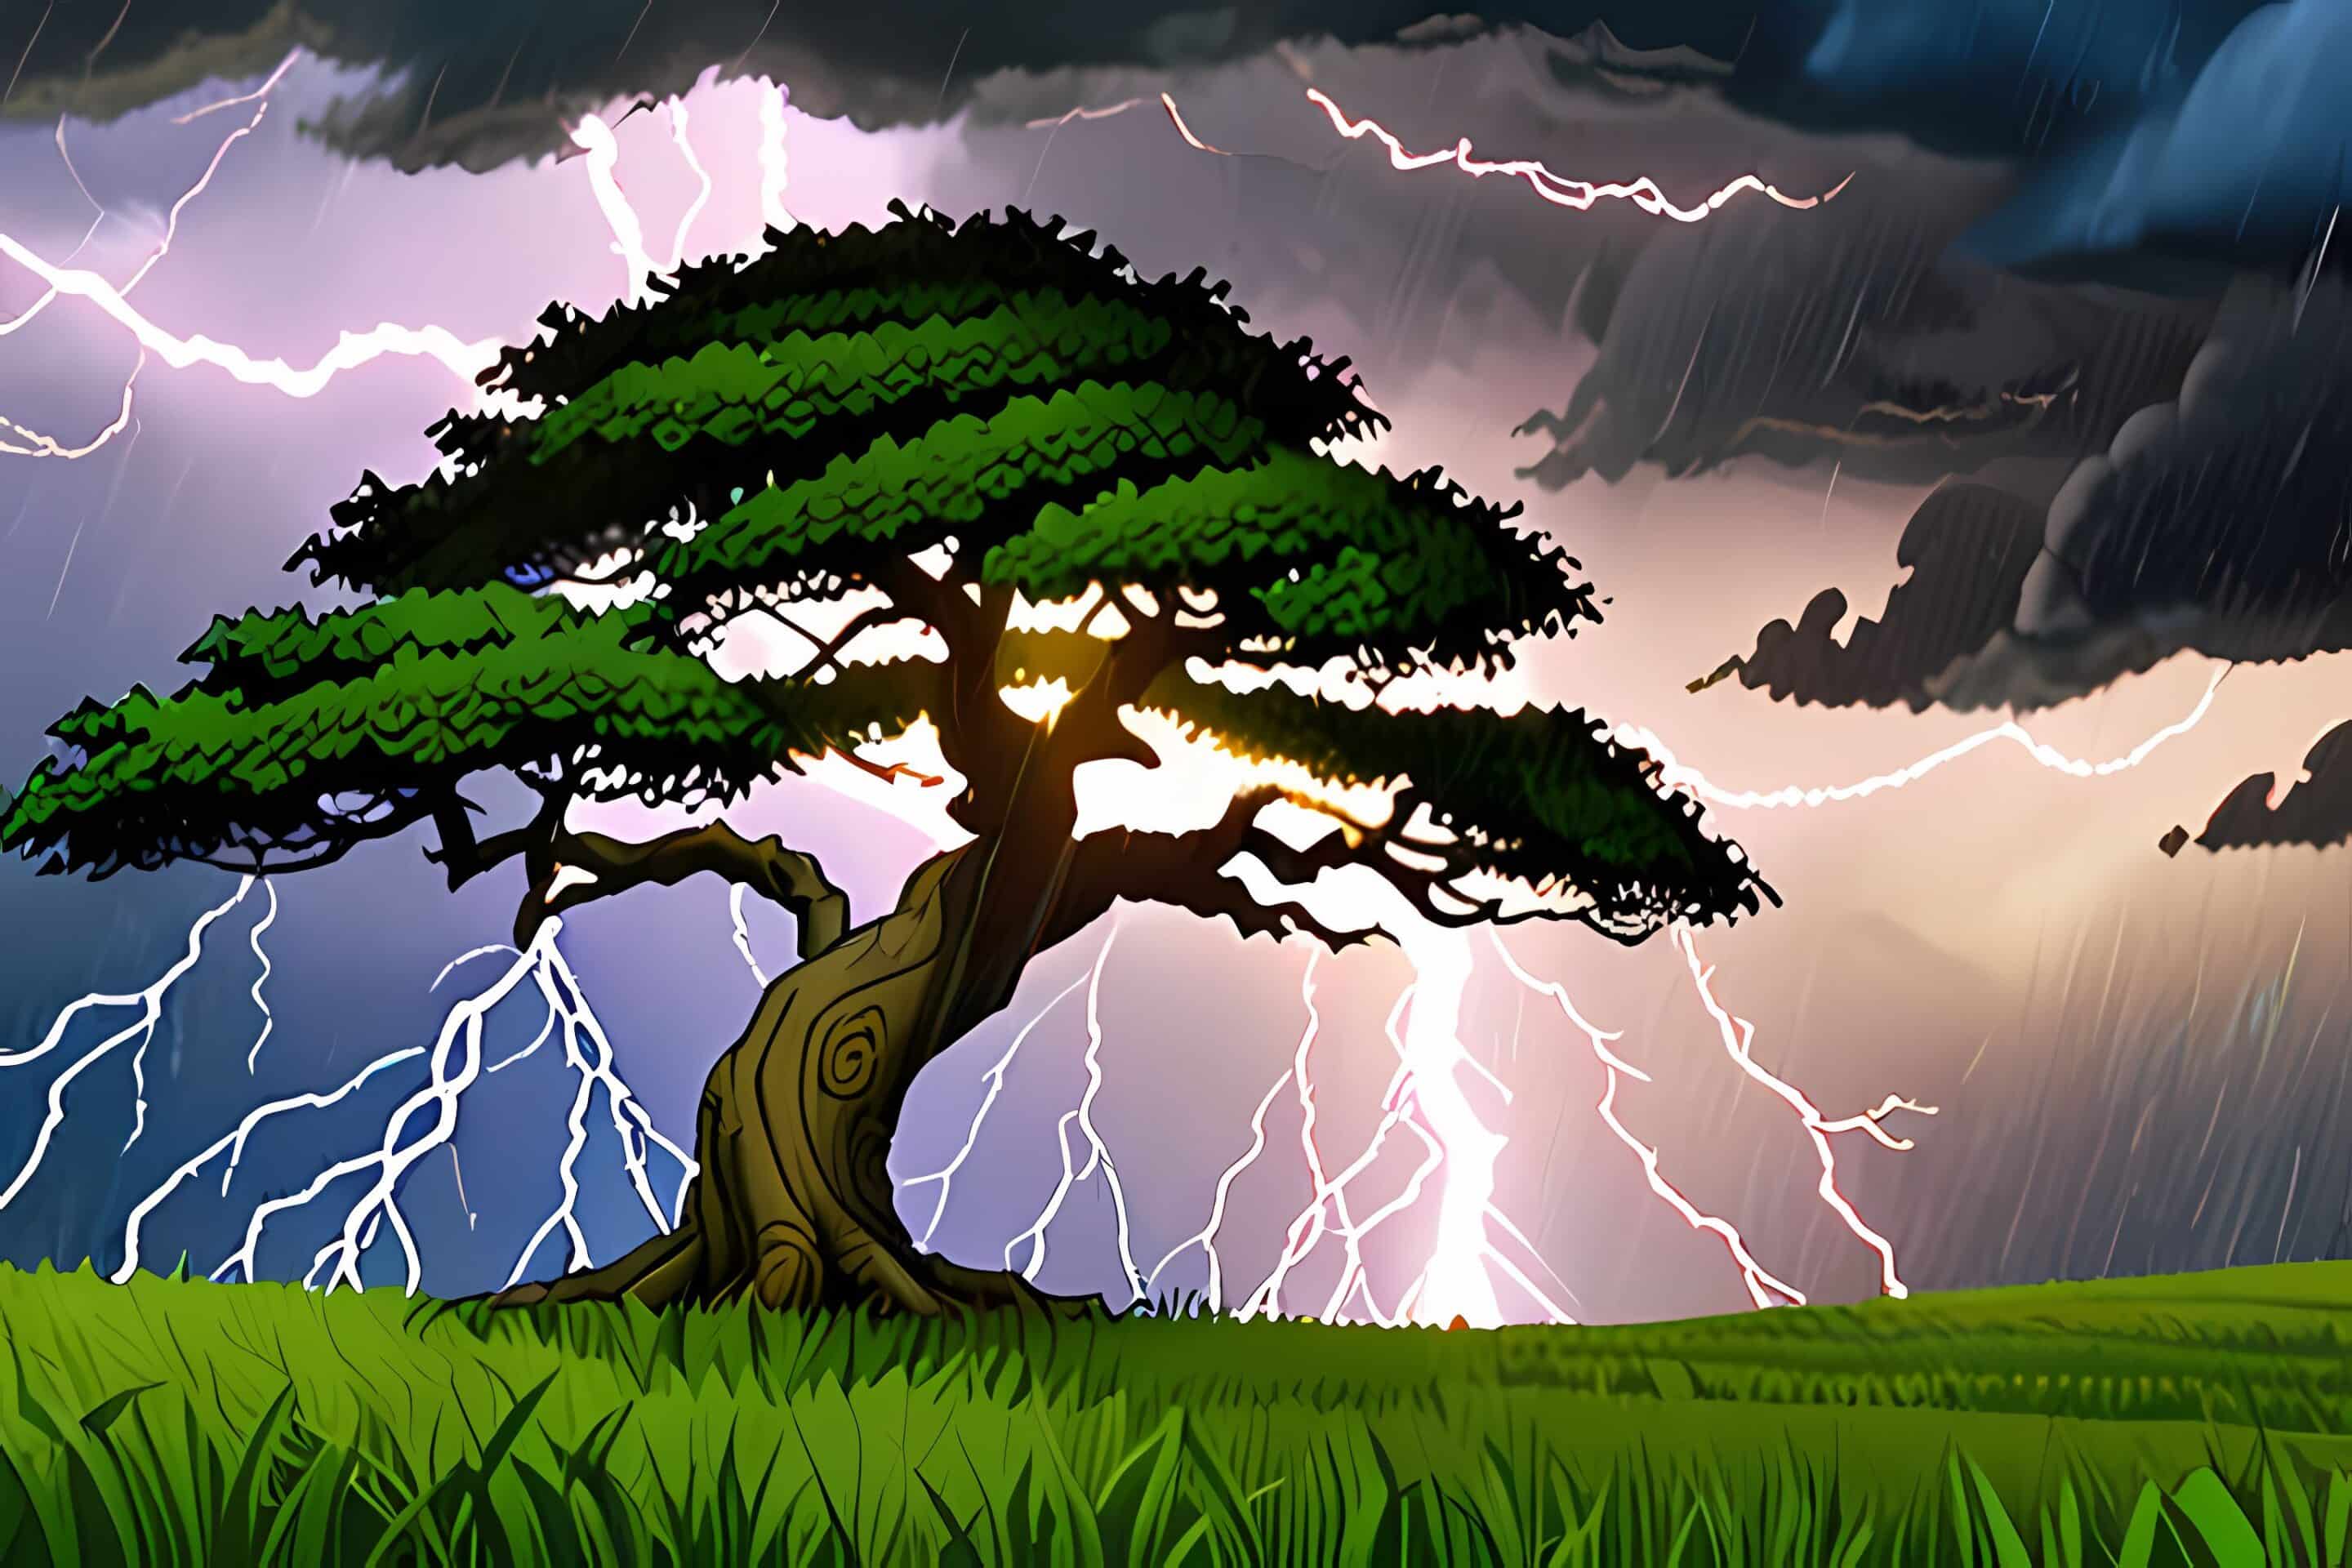 Harness the power of calm - Tree in a storm